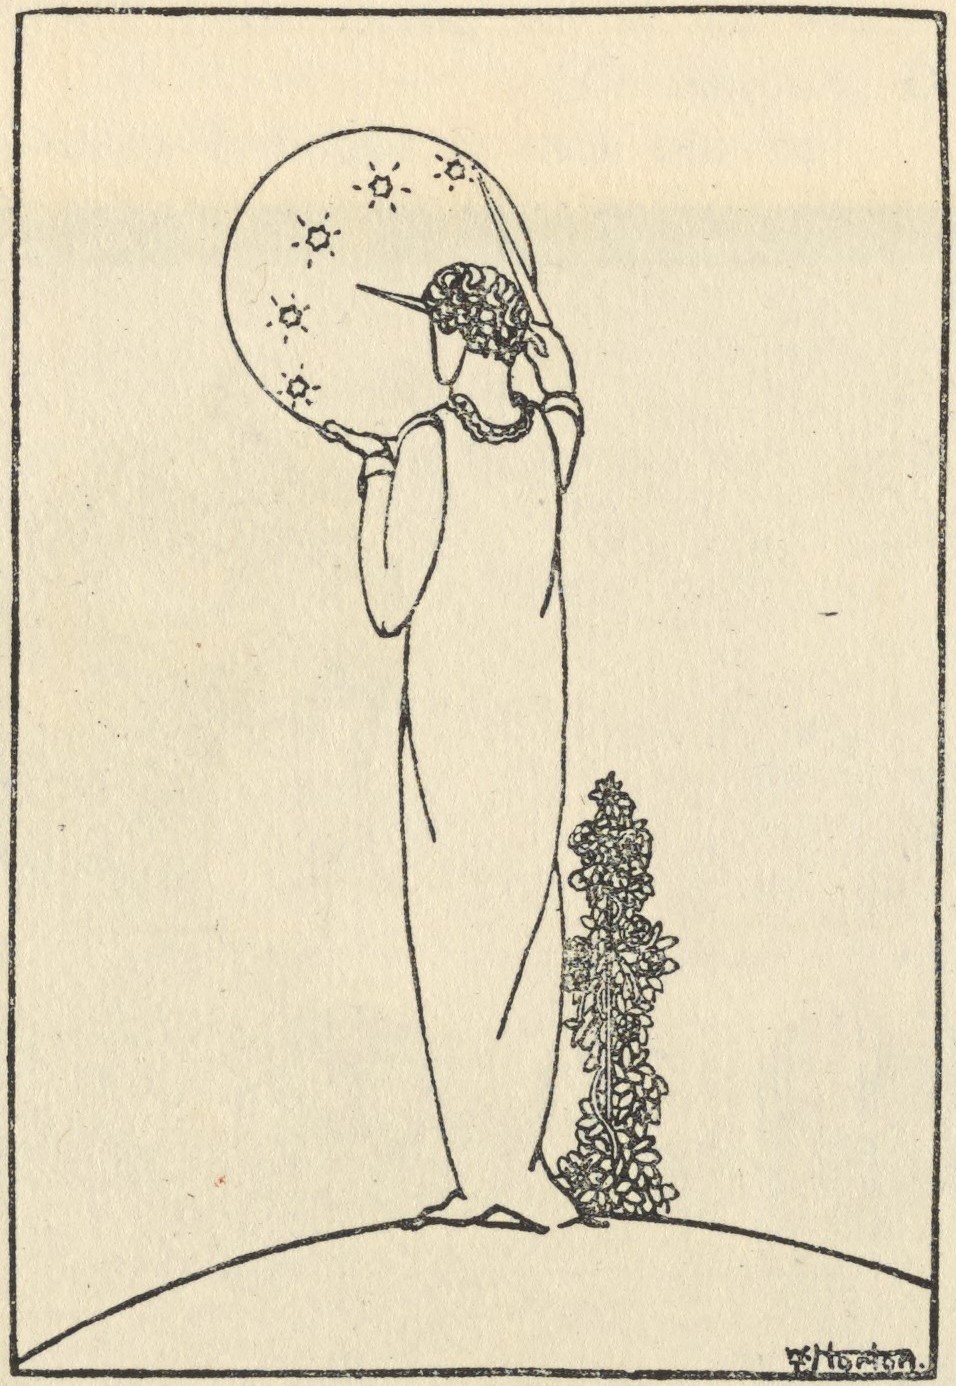 This pen-and-ink half-page illustration is centered above the poem’s text, outlined in a thin black border, in portrait orientation. In it, a robed figure stands on a round hill, facing away from the viewer, painting a garland of stars on a floating orb. To the right of the figure is a leafy tree, which stands waist high. The artist’s signature is in the bottom right corner of the frame.